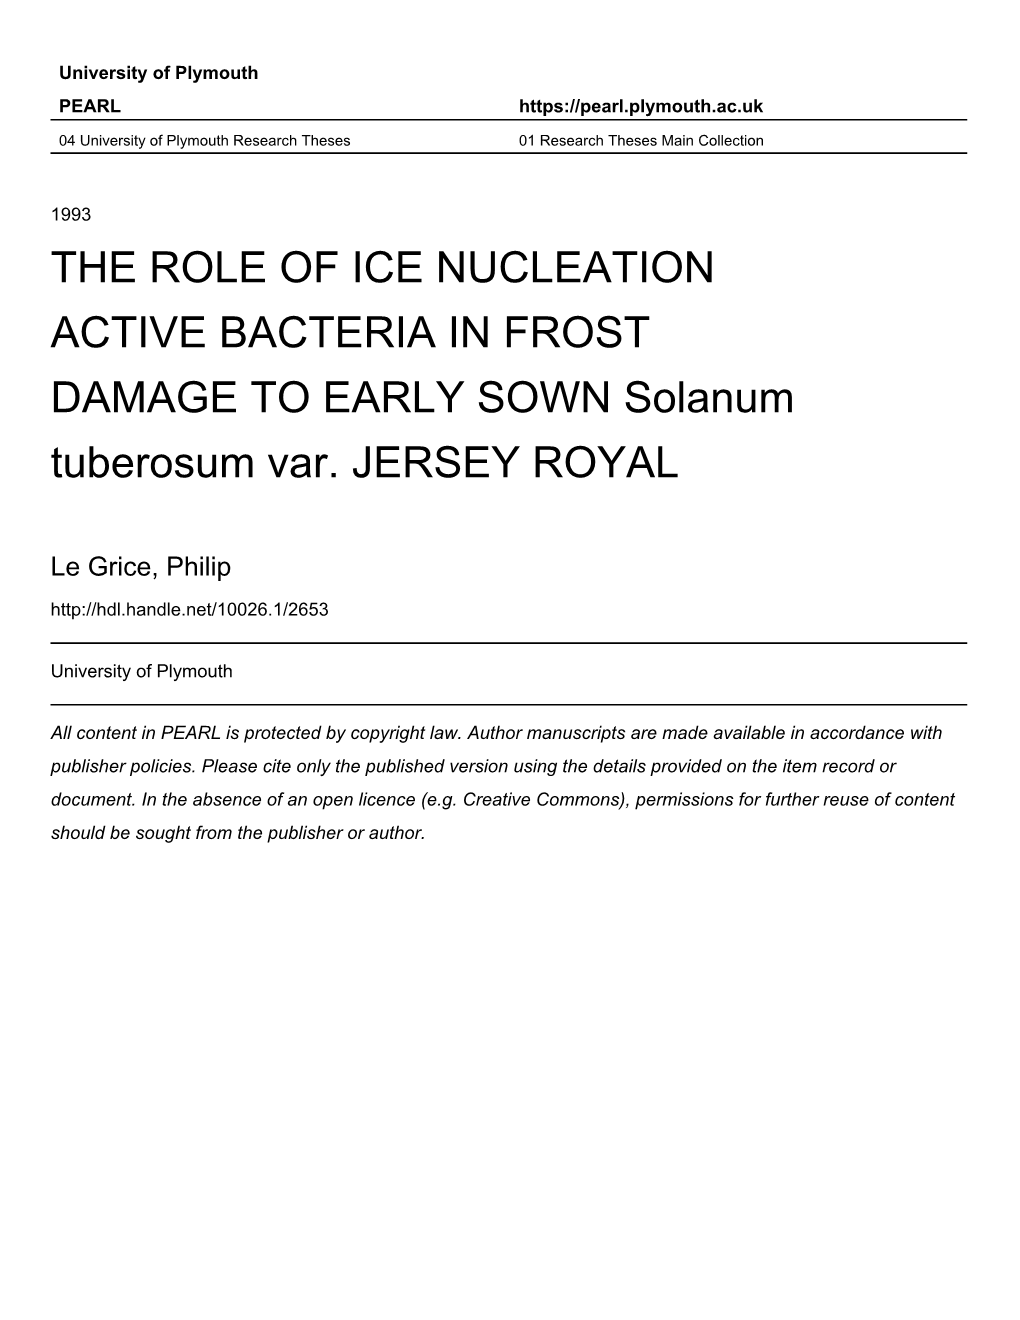 THE ROLE of ICE NUCLEATION ACTIVE BACTERIA in FROST DAMAGE to EARLY SOWN Solanum Tuberosum Var